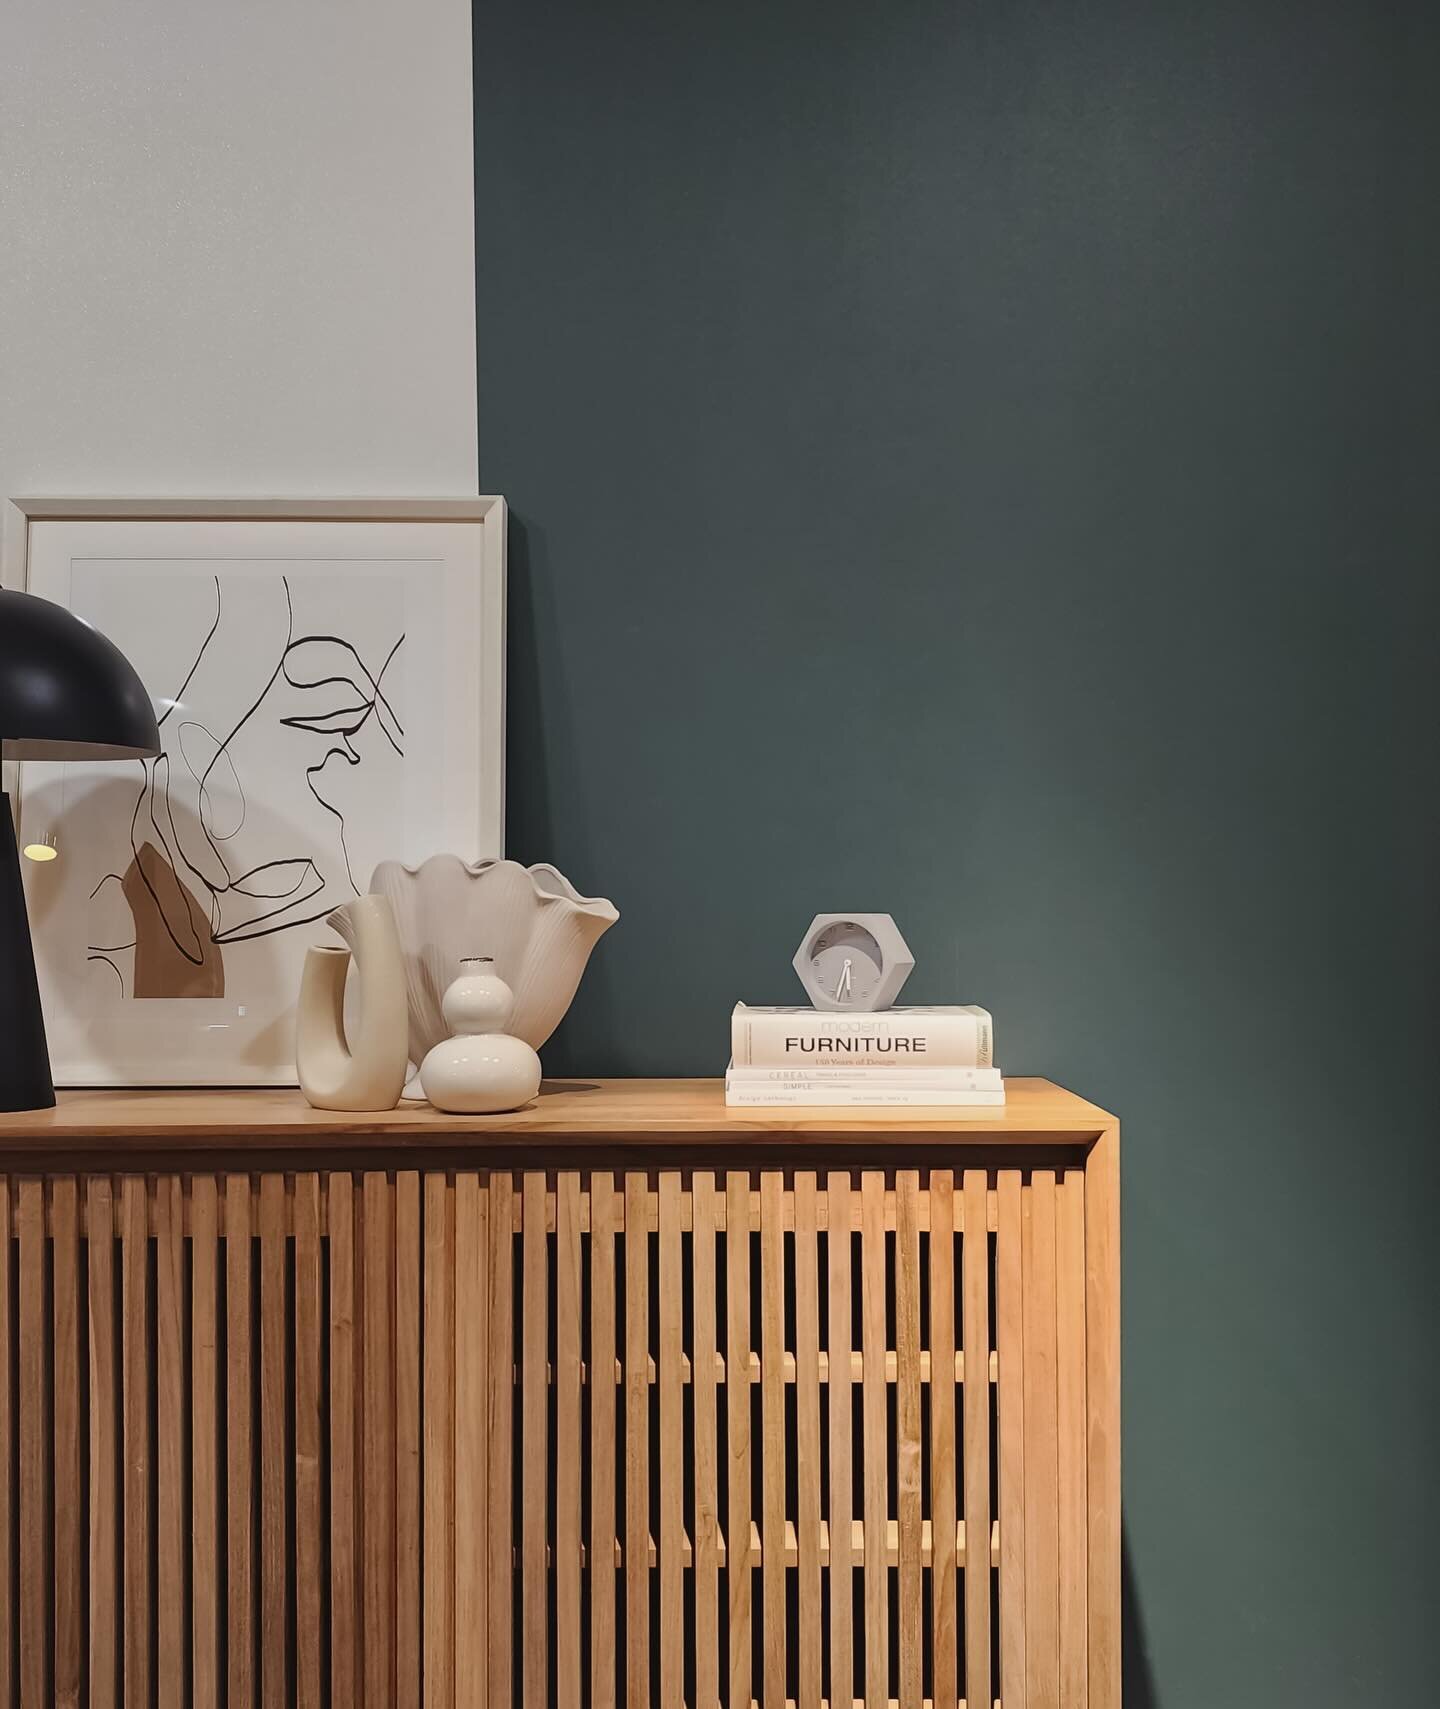 Latest styling for @emoh_furniture ,highlighting the beauty of combining understated modern Scandinavian elegance with Southeast Asian traditional craftsmanship. Natural, timeless and adaptable🌿

Jodoh sideboard made from reclaimed teak wood by @moo